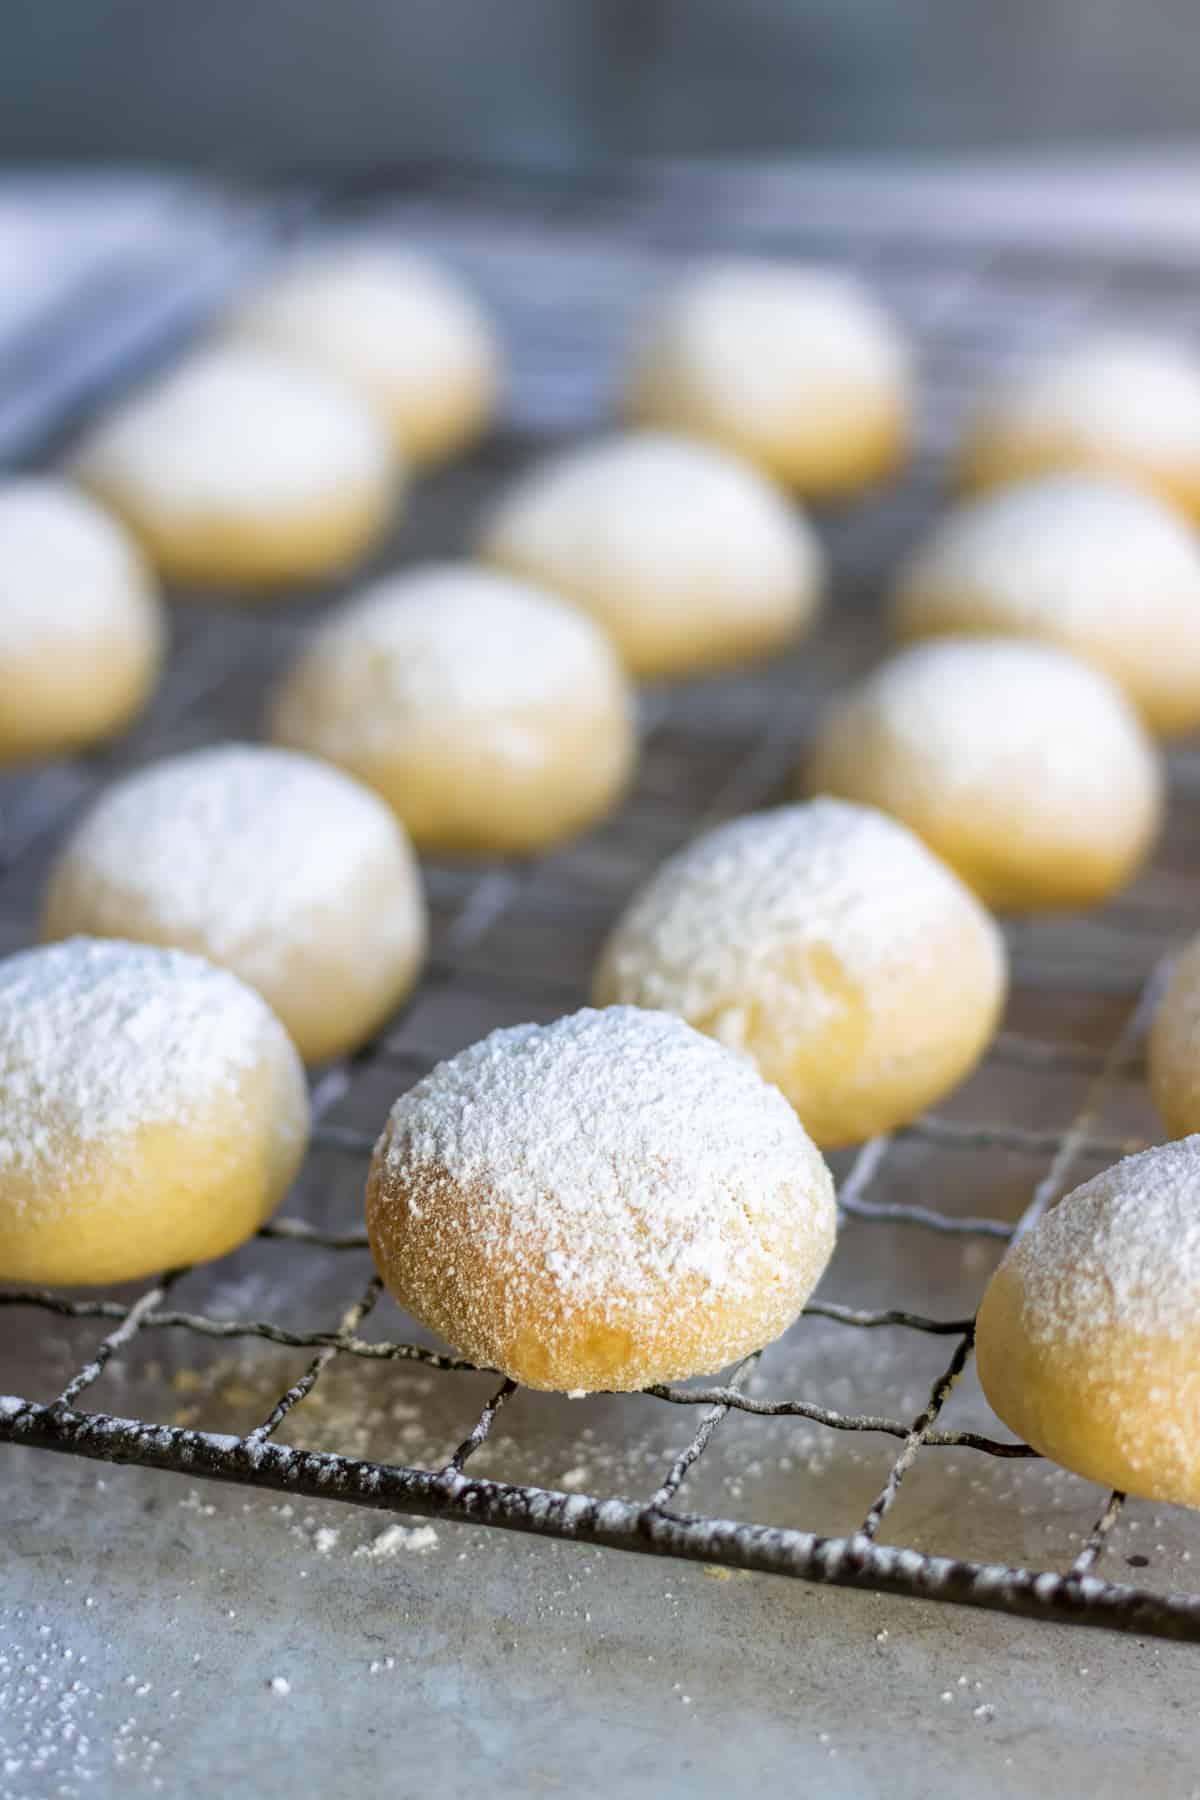 Balls of shortbread cornstarch cookies dusted with powdered sugar.